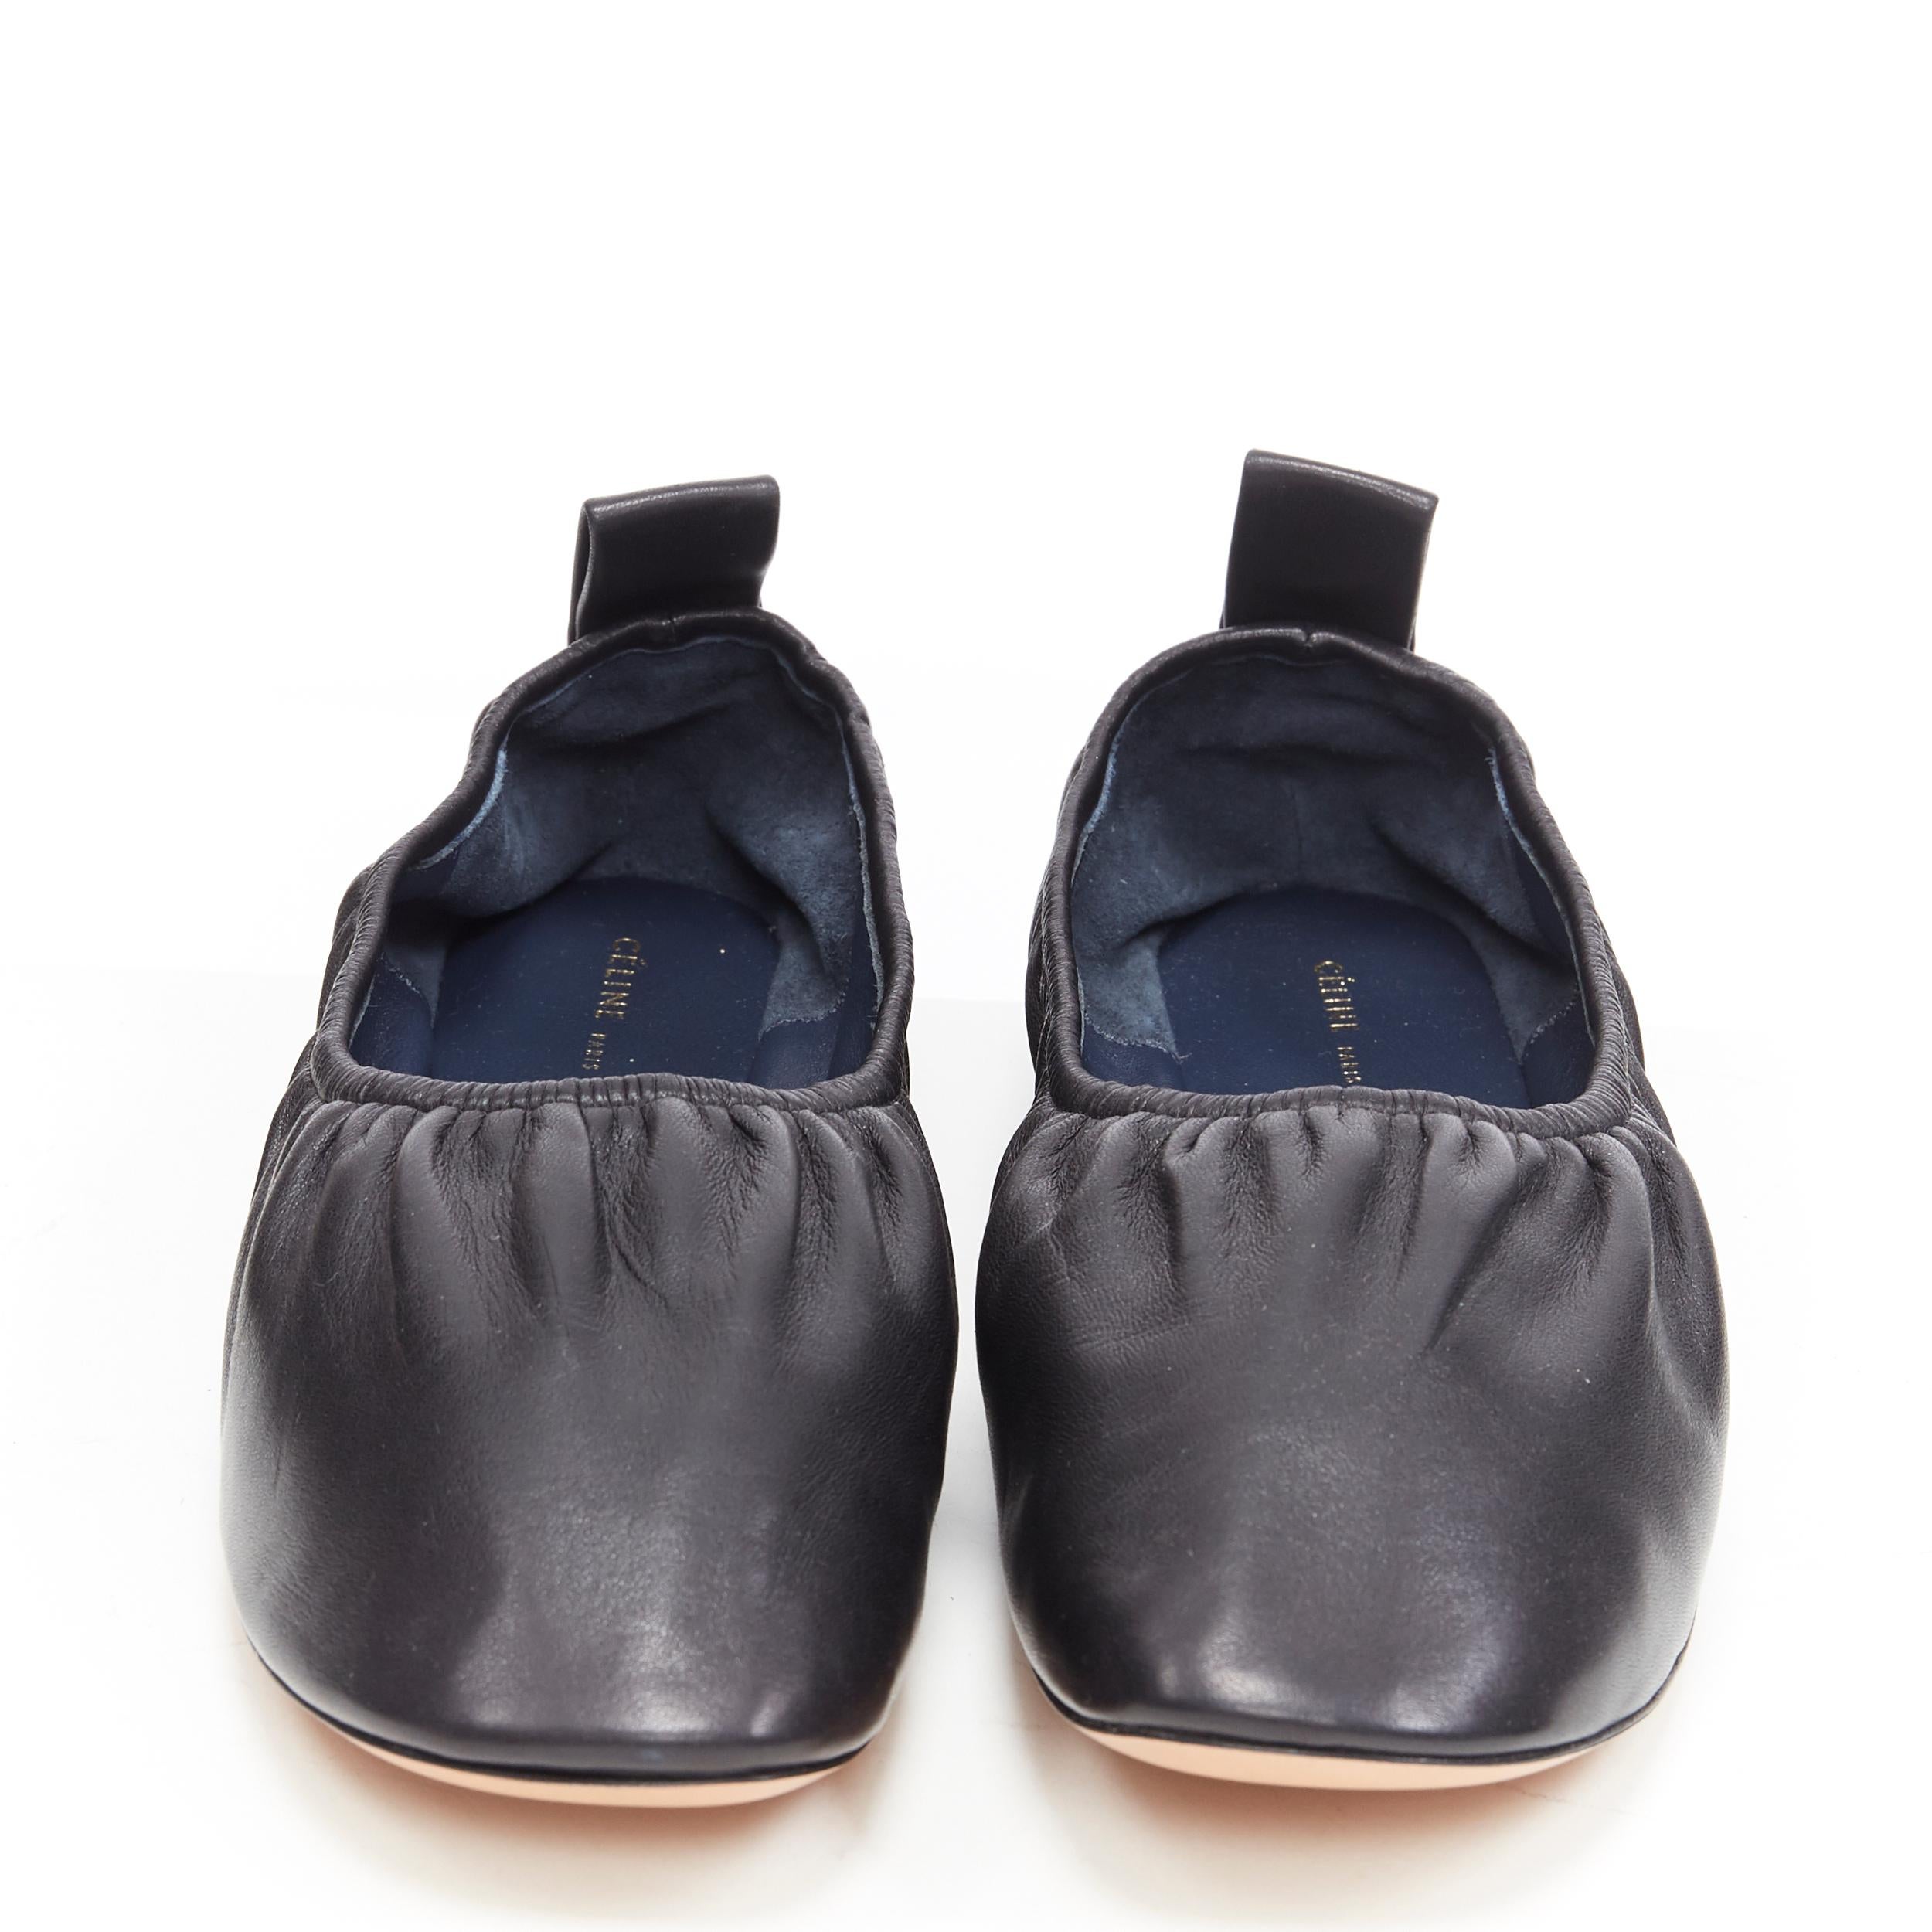 new CELINE PHOEBE PHILO black soft leather round toe ruched ballet flats EU38
Brand: Celine
Designer: Phoebe Philo
Model Name / Style: Ballet flats
Material: Leather
Color: Black
Pattern: Solid
Closure: Slip on
Lining material: Leather
Extra Detail: